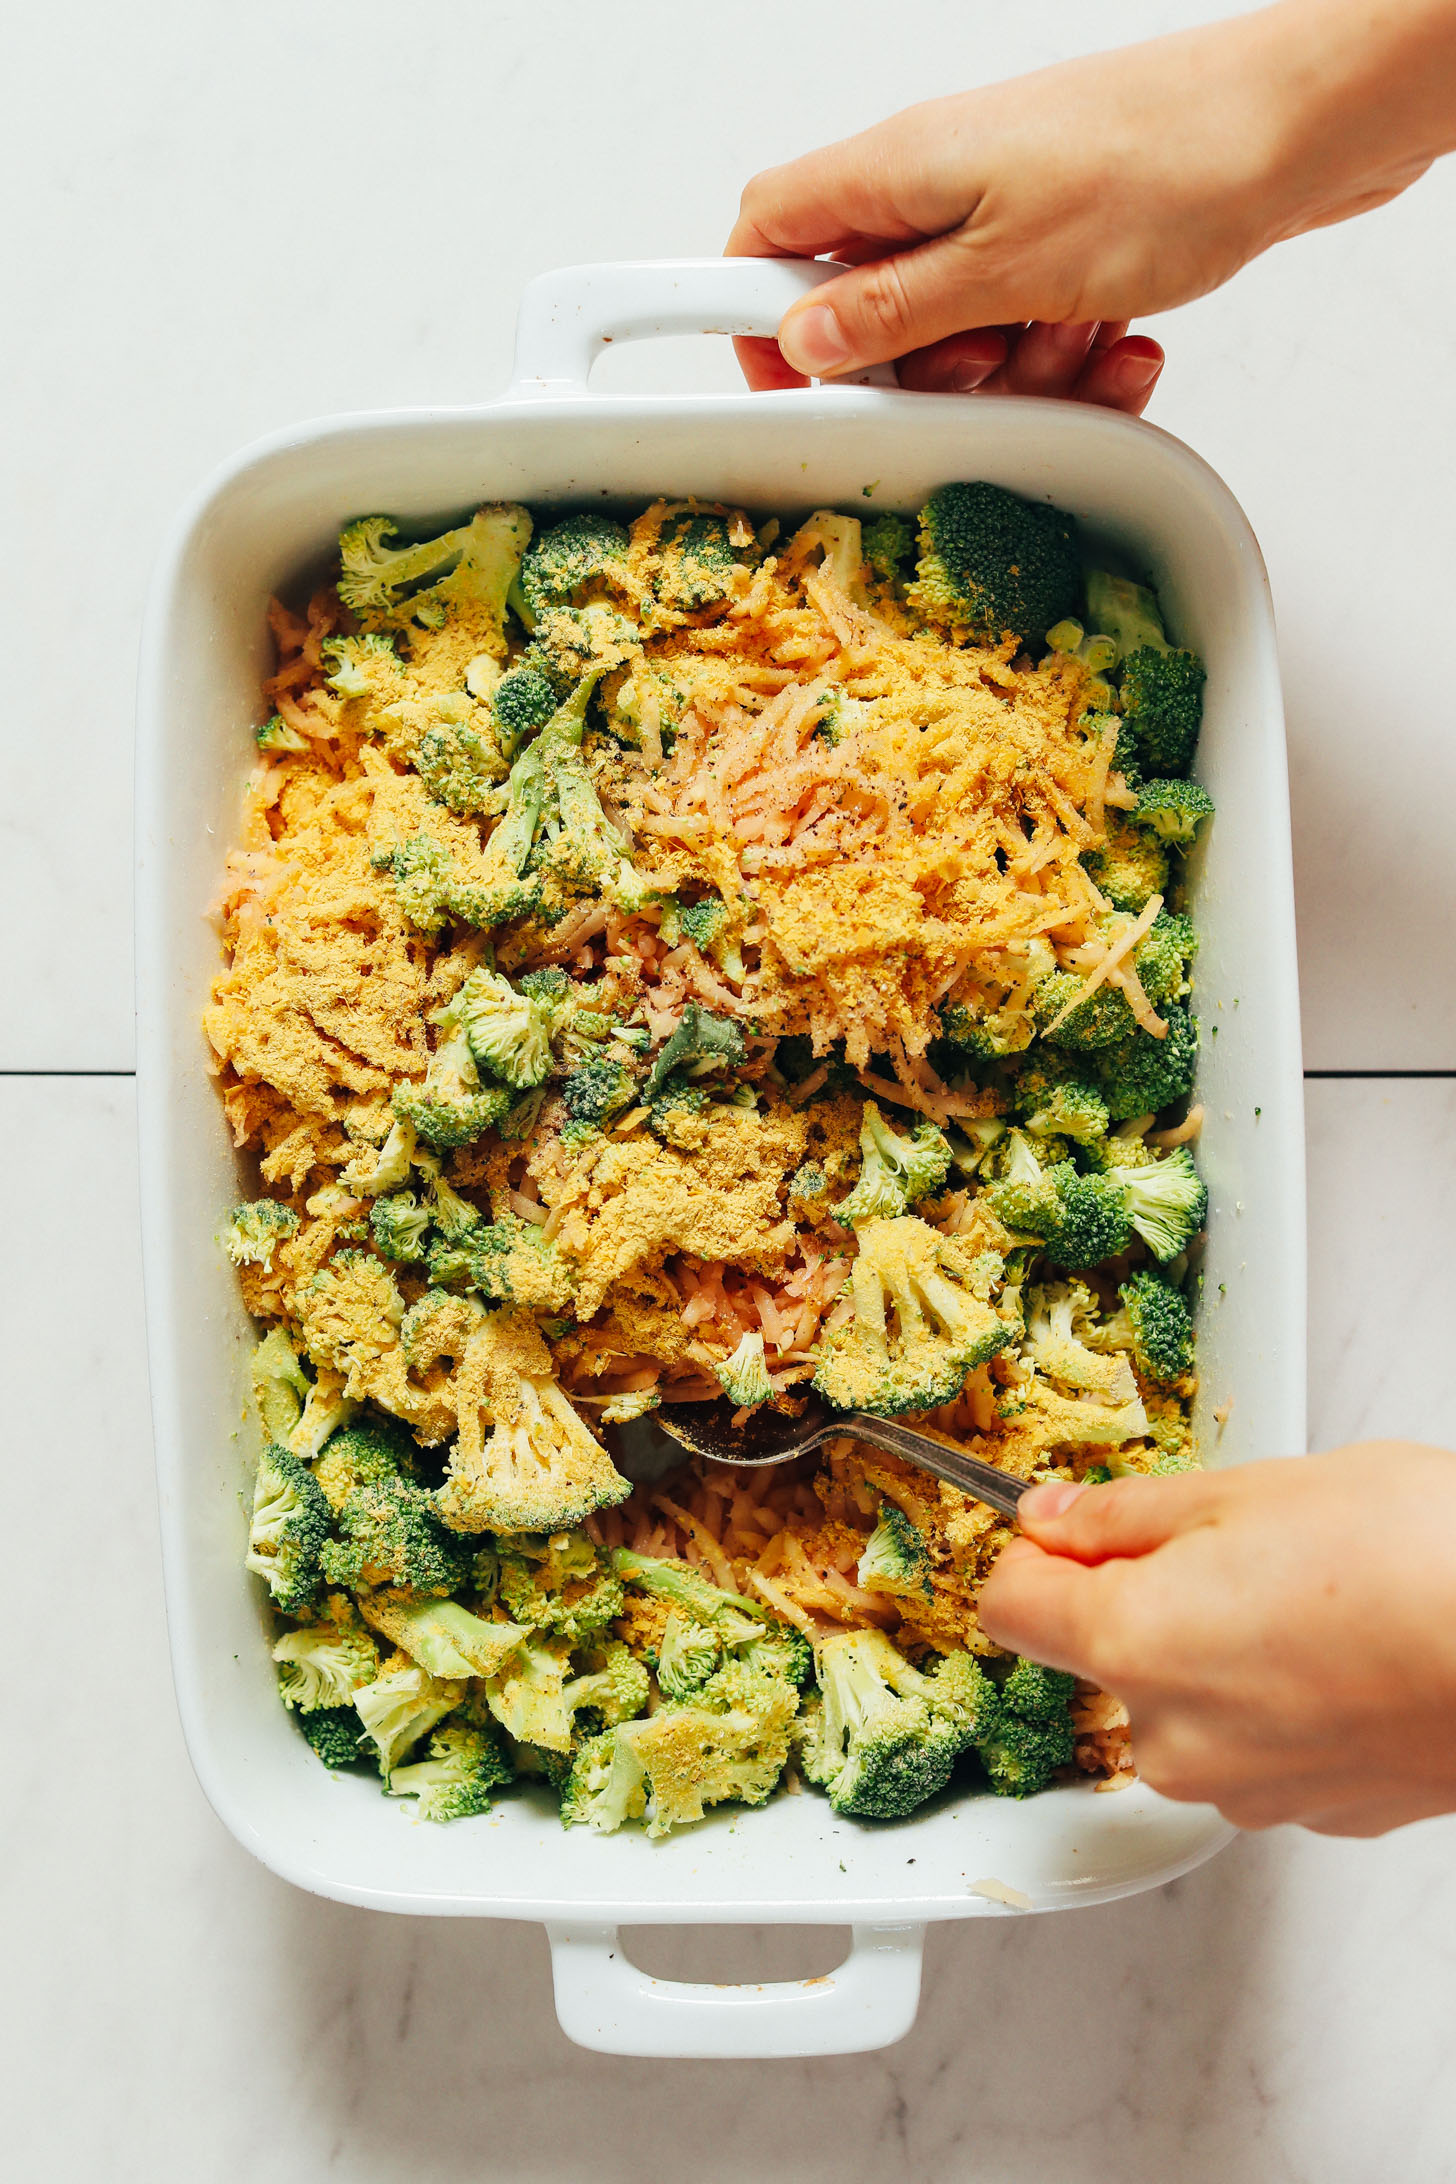 Holding a spoon and pan of our vegan broccoli hashbrown bake recipe